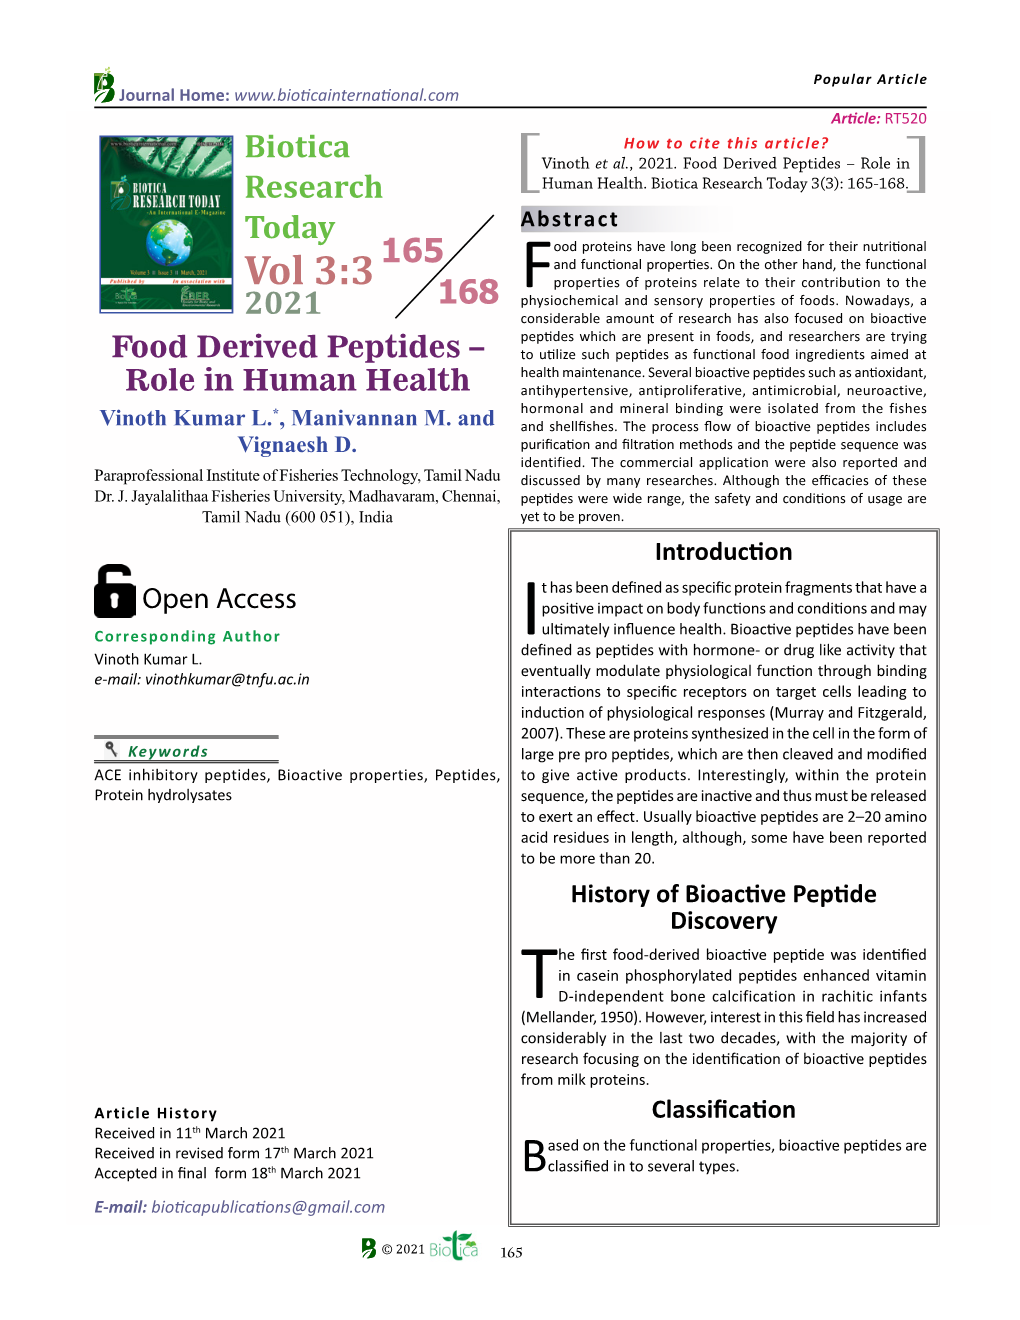 Vol 3:3 Properties of Proteins Relate to Their Contribution to the 168 Physiochemicalf and Sensory Properties of Foods